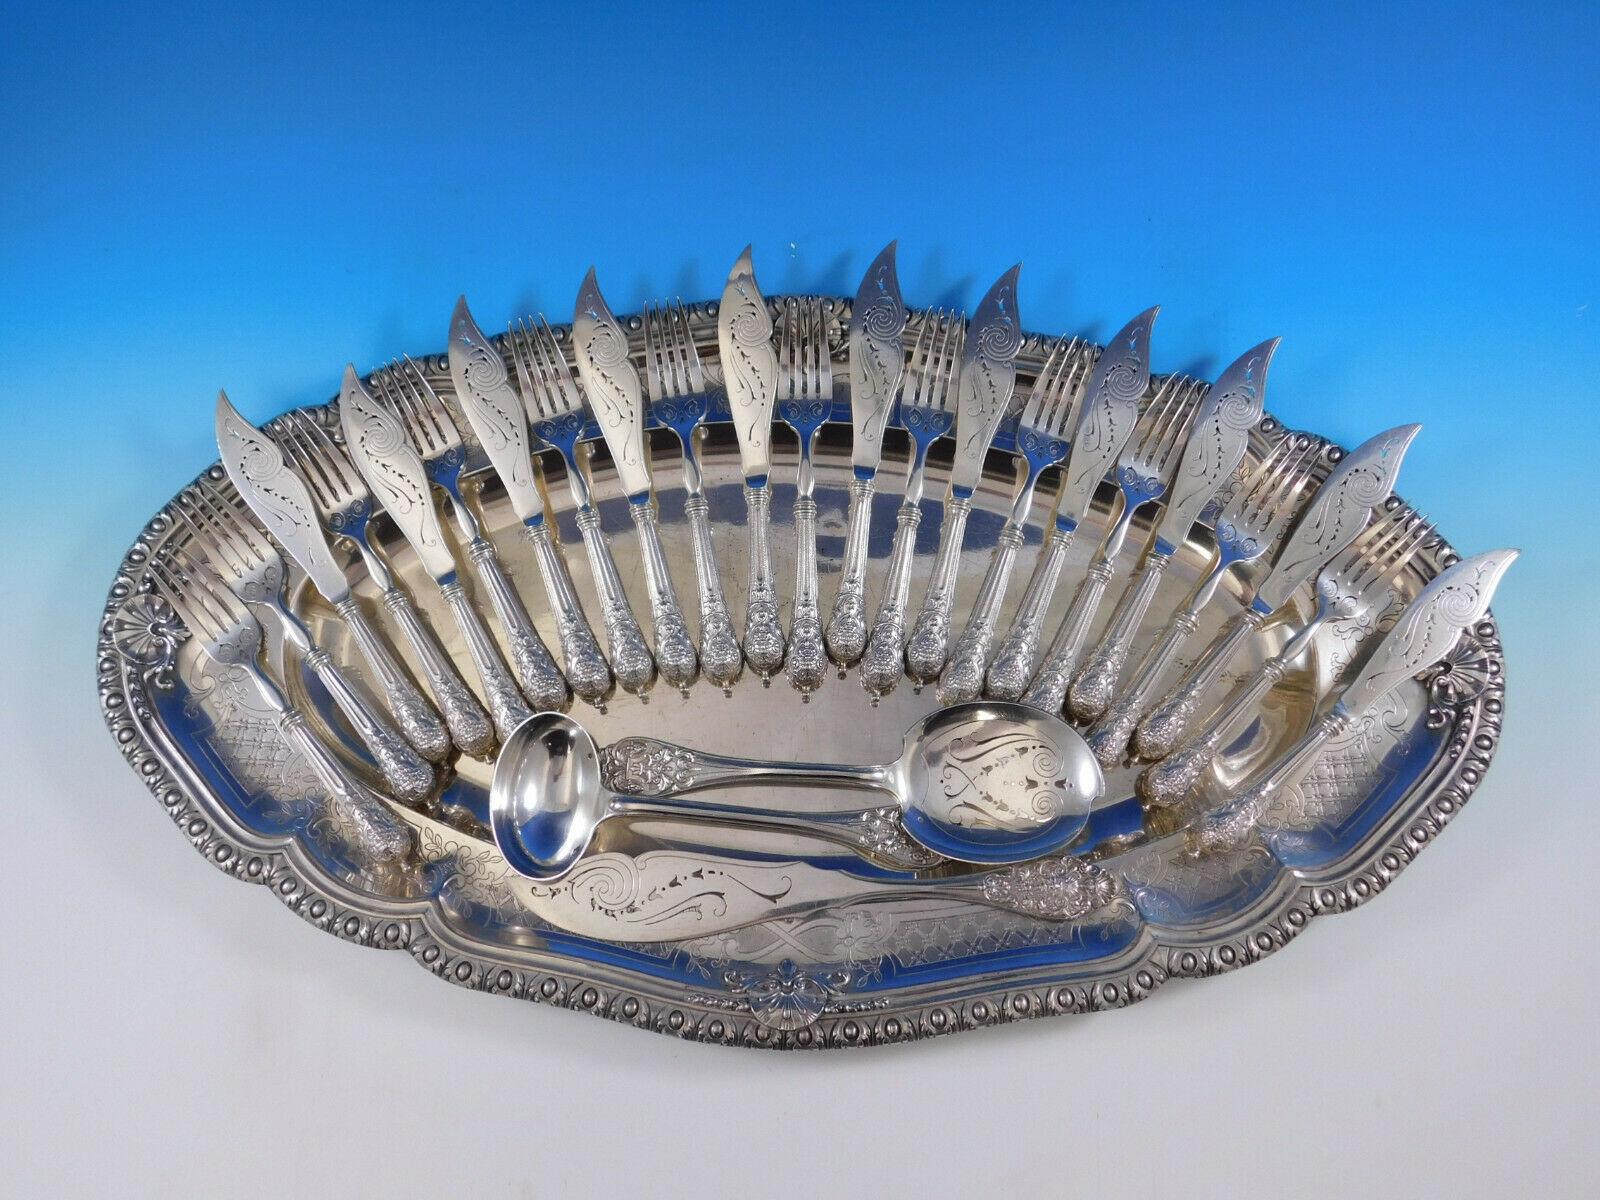 Beautifully pierced French sterling silver fish set with figural Renaissance design, 26 piece cutlery set plus fish serving platter (dated 1925). This set includes:

11 individual fish knives, hollow handle, with pierced sterling blades, 8